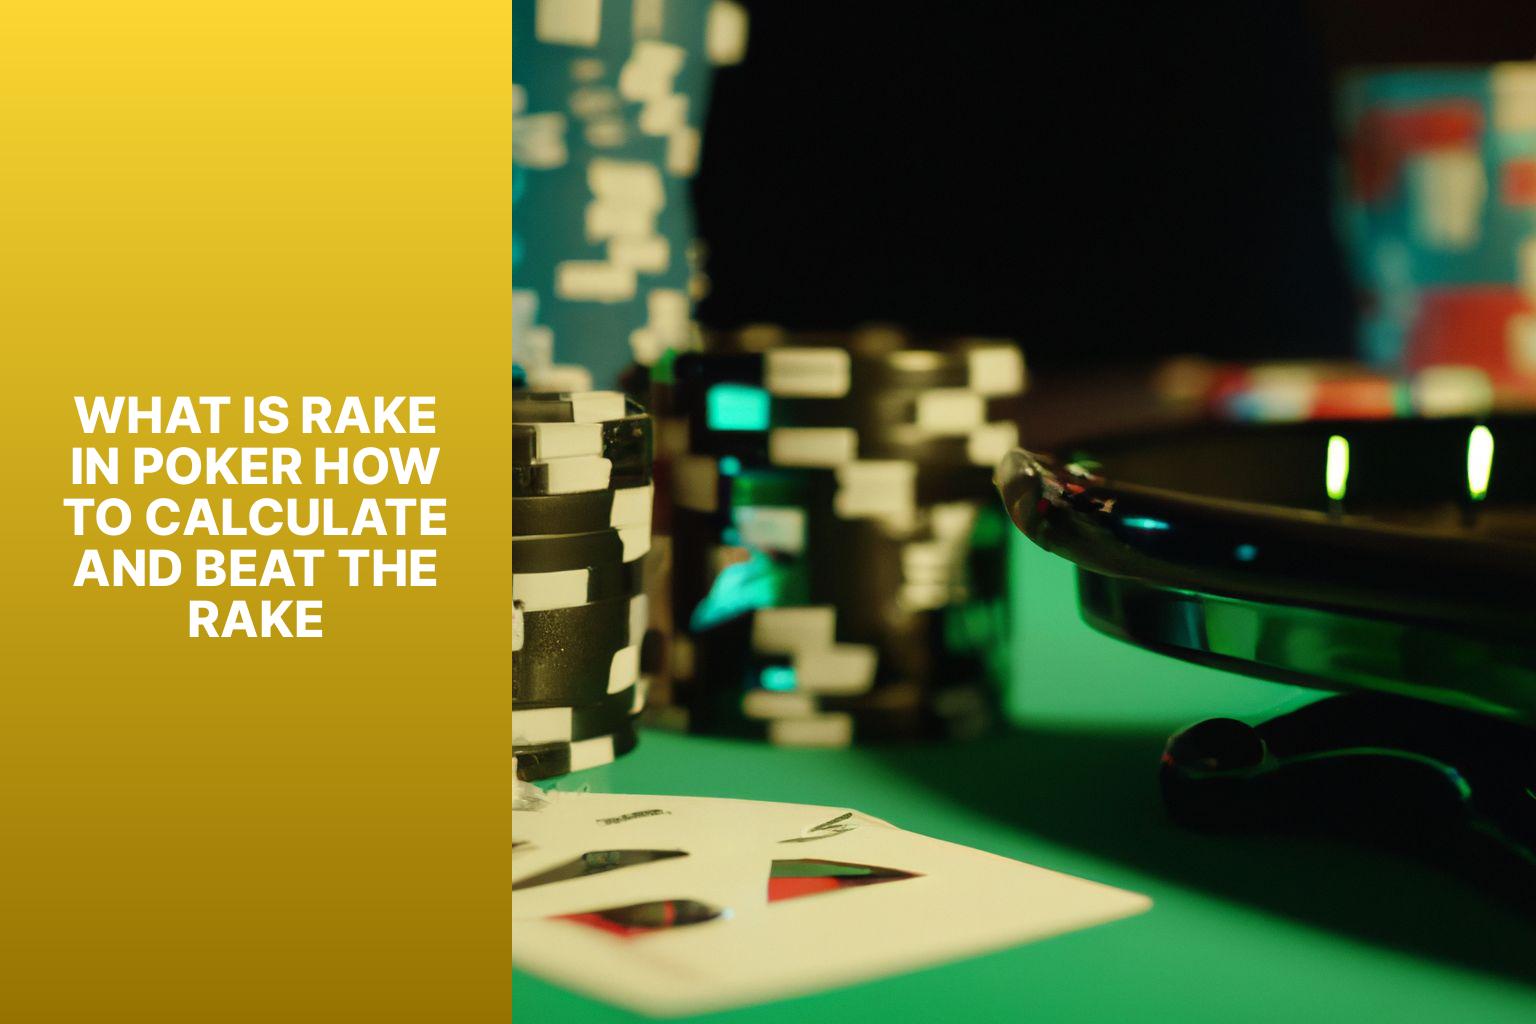 What Is Rake in Poker How to Calculate and Beat the Rake